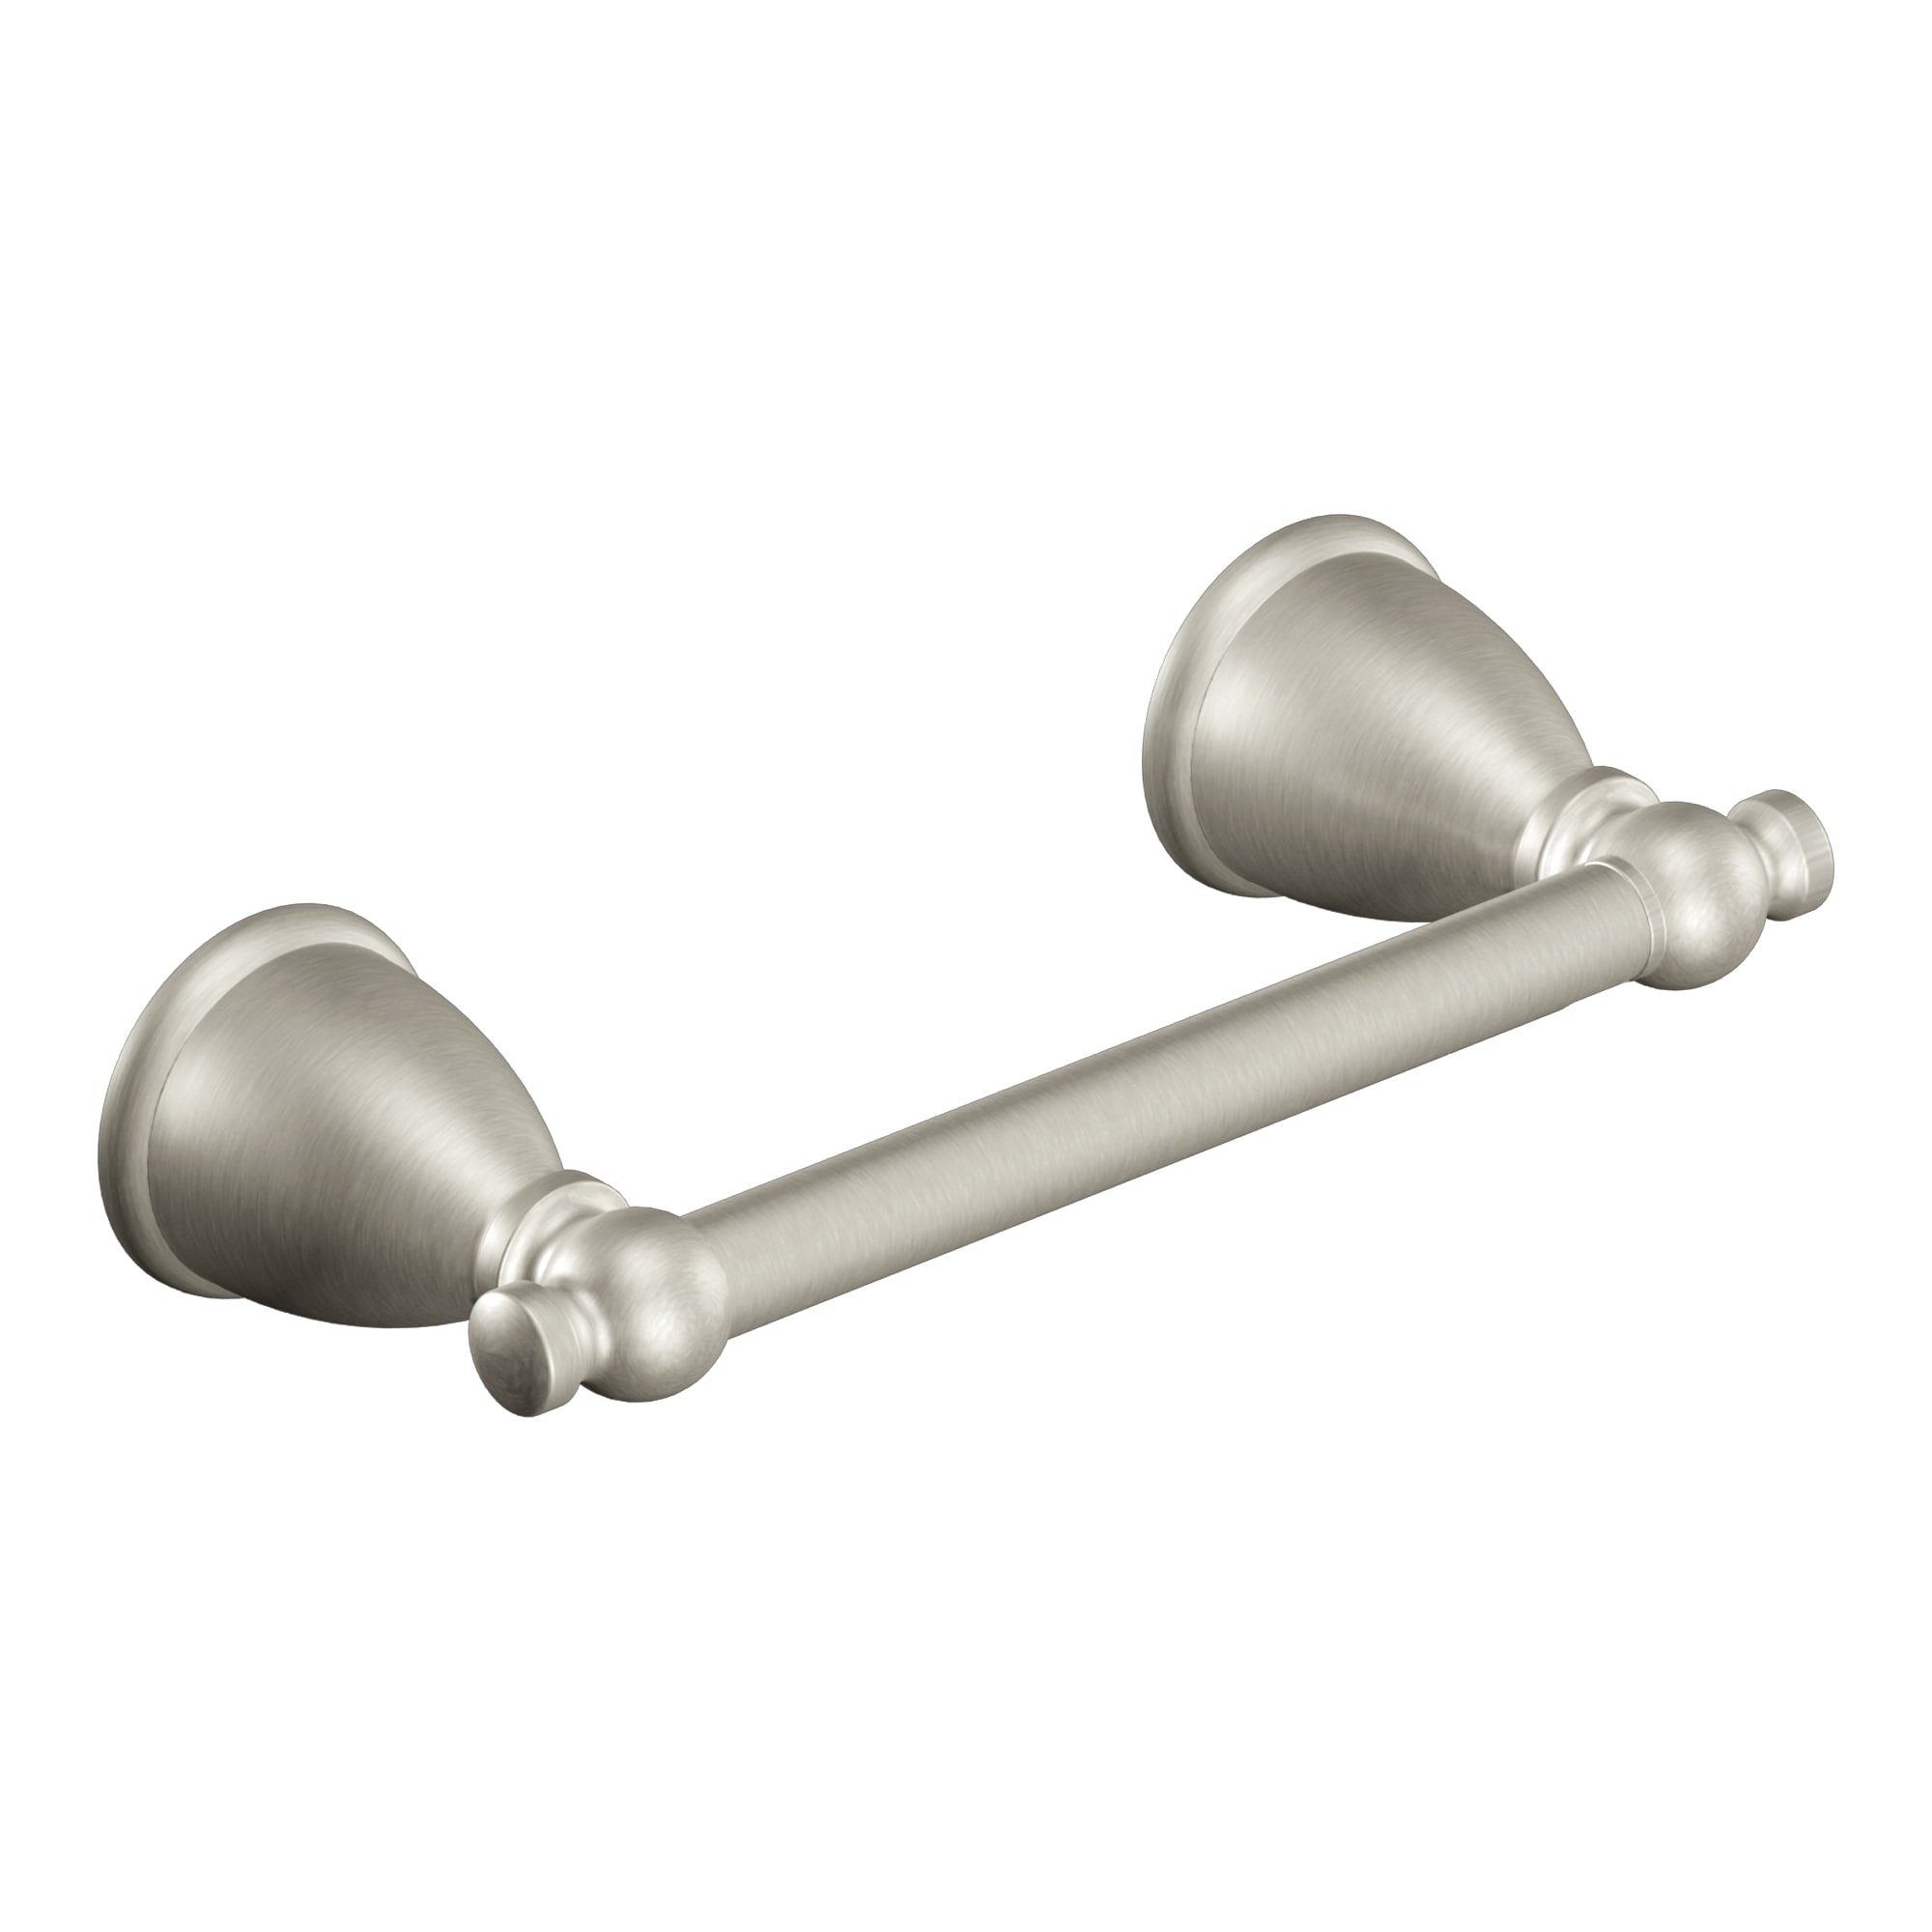 Moen 3-Piece Caldwell Brushed Nickel Decorative Bathroom Hardware Set with  Towel Bar,Toilet Paper Holder and Towel Ring